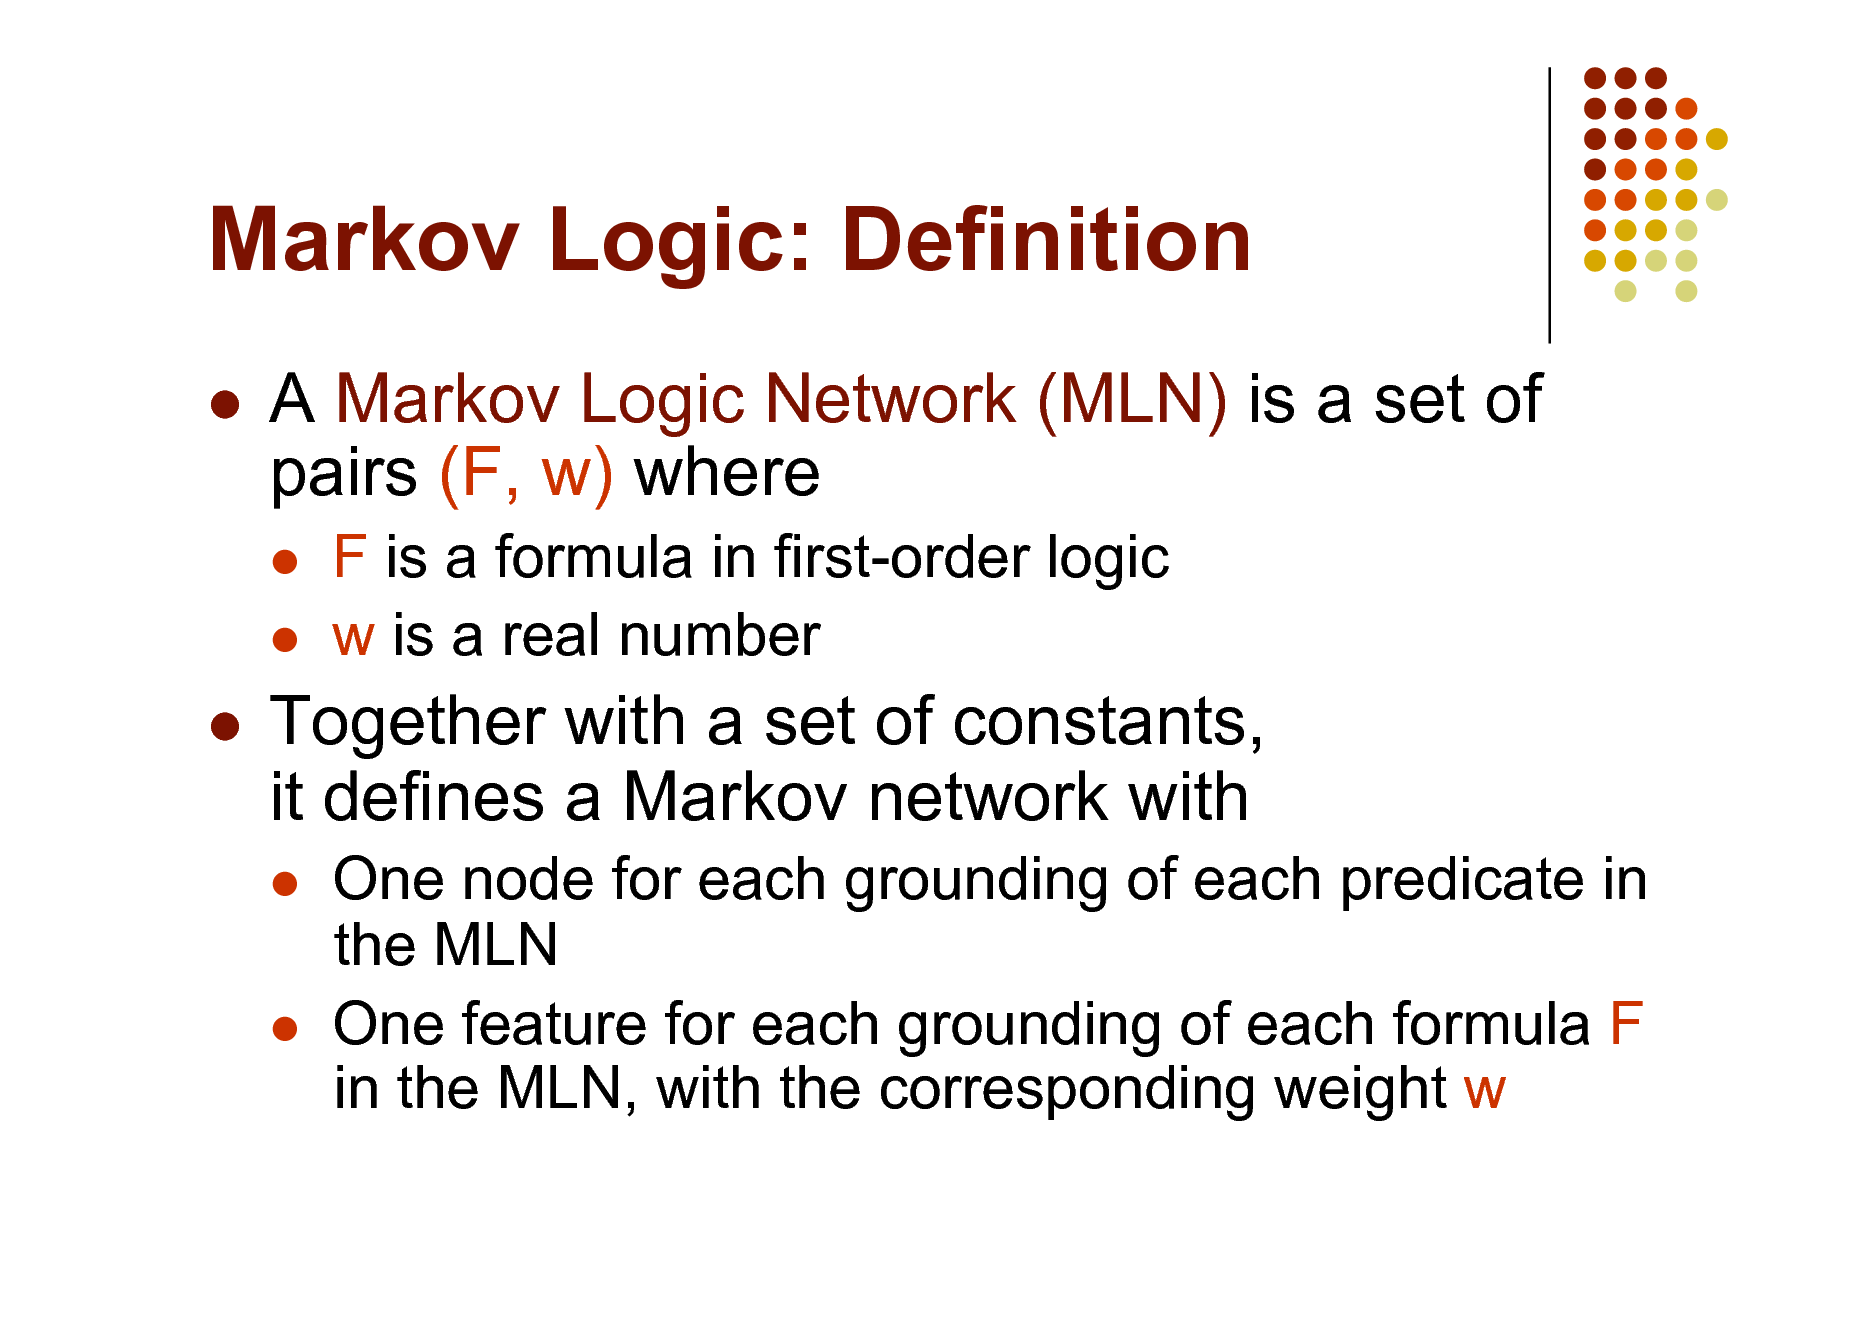 Slide: Markov Logic: Definition


A Markov Logic Network (MLN) is a set of pairs (F, w) where
 

F is a formula in first-order logic w is a real number



Together with a set of constants, it defines a Markov network with
 

One node for each grounding of each predicate in the MLN One feature for each grounding of each formula F in the MLN, with the corresponding weight w

